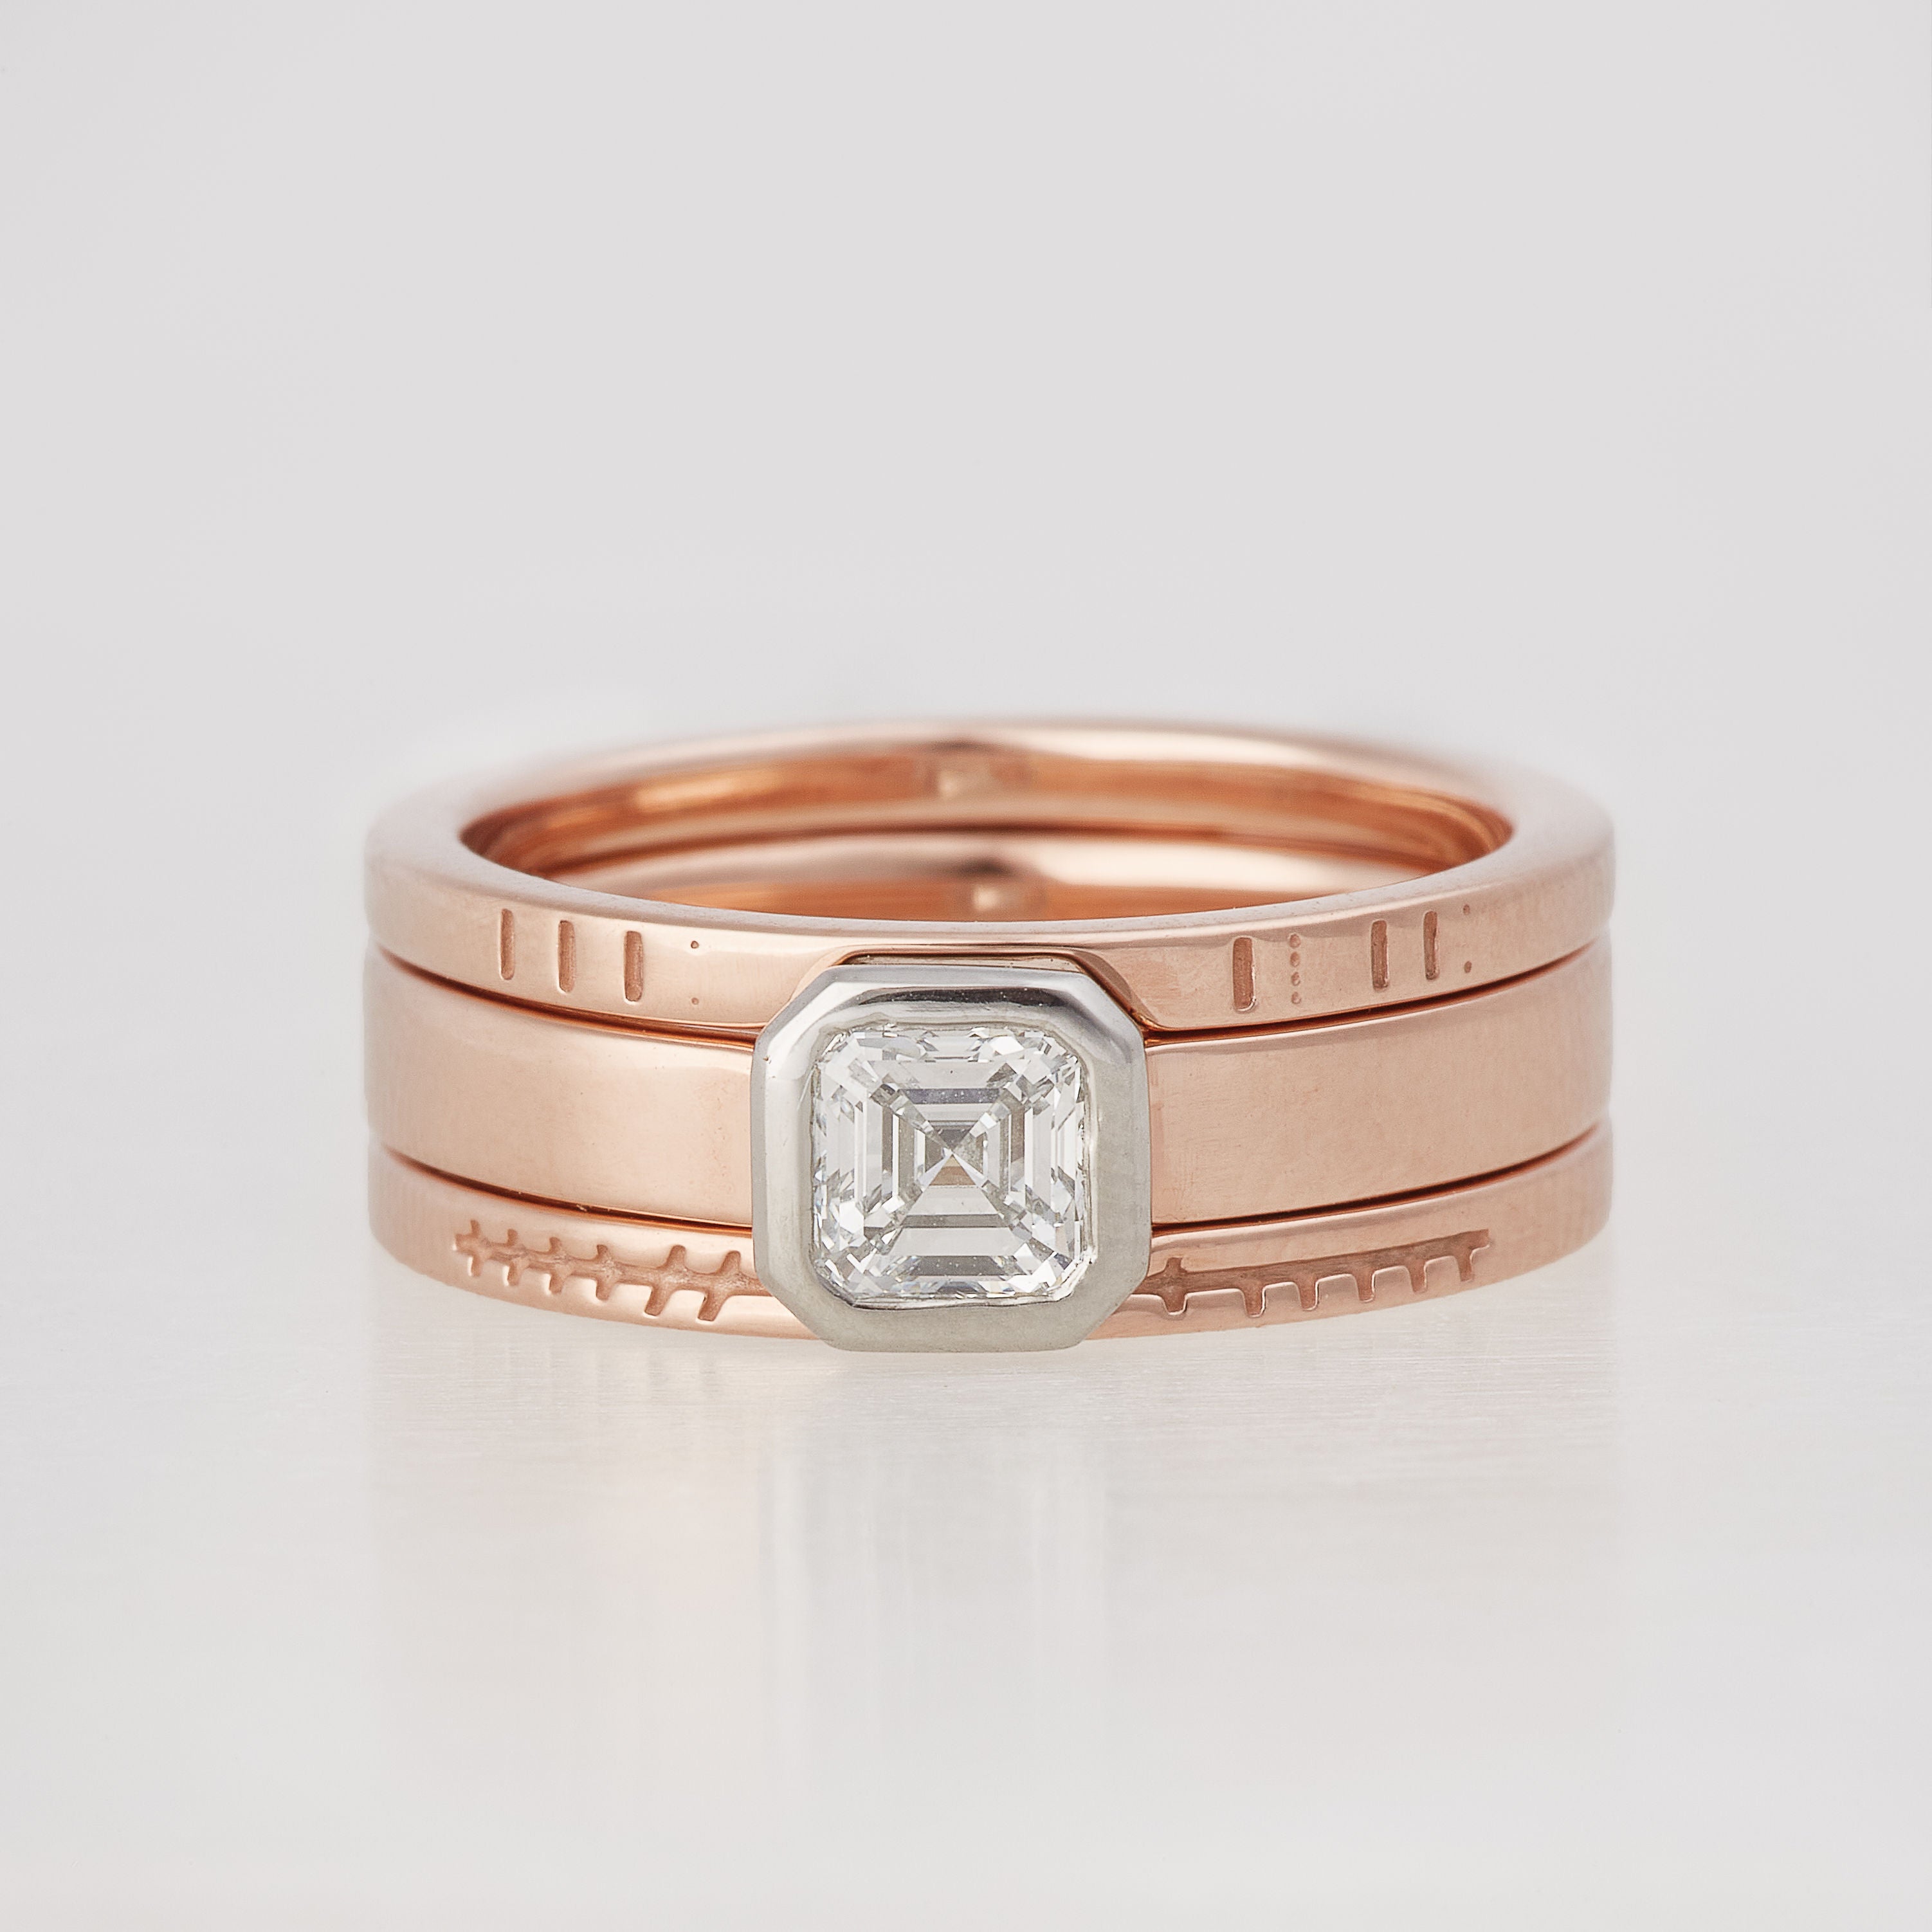 Asscher cut diamond engagement ring in 14K Rose Gold with coordinating wedding band